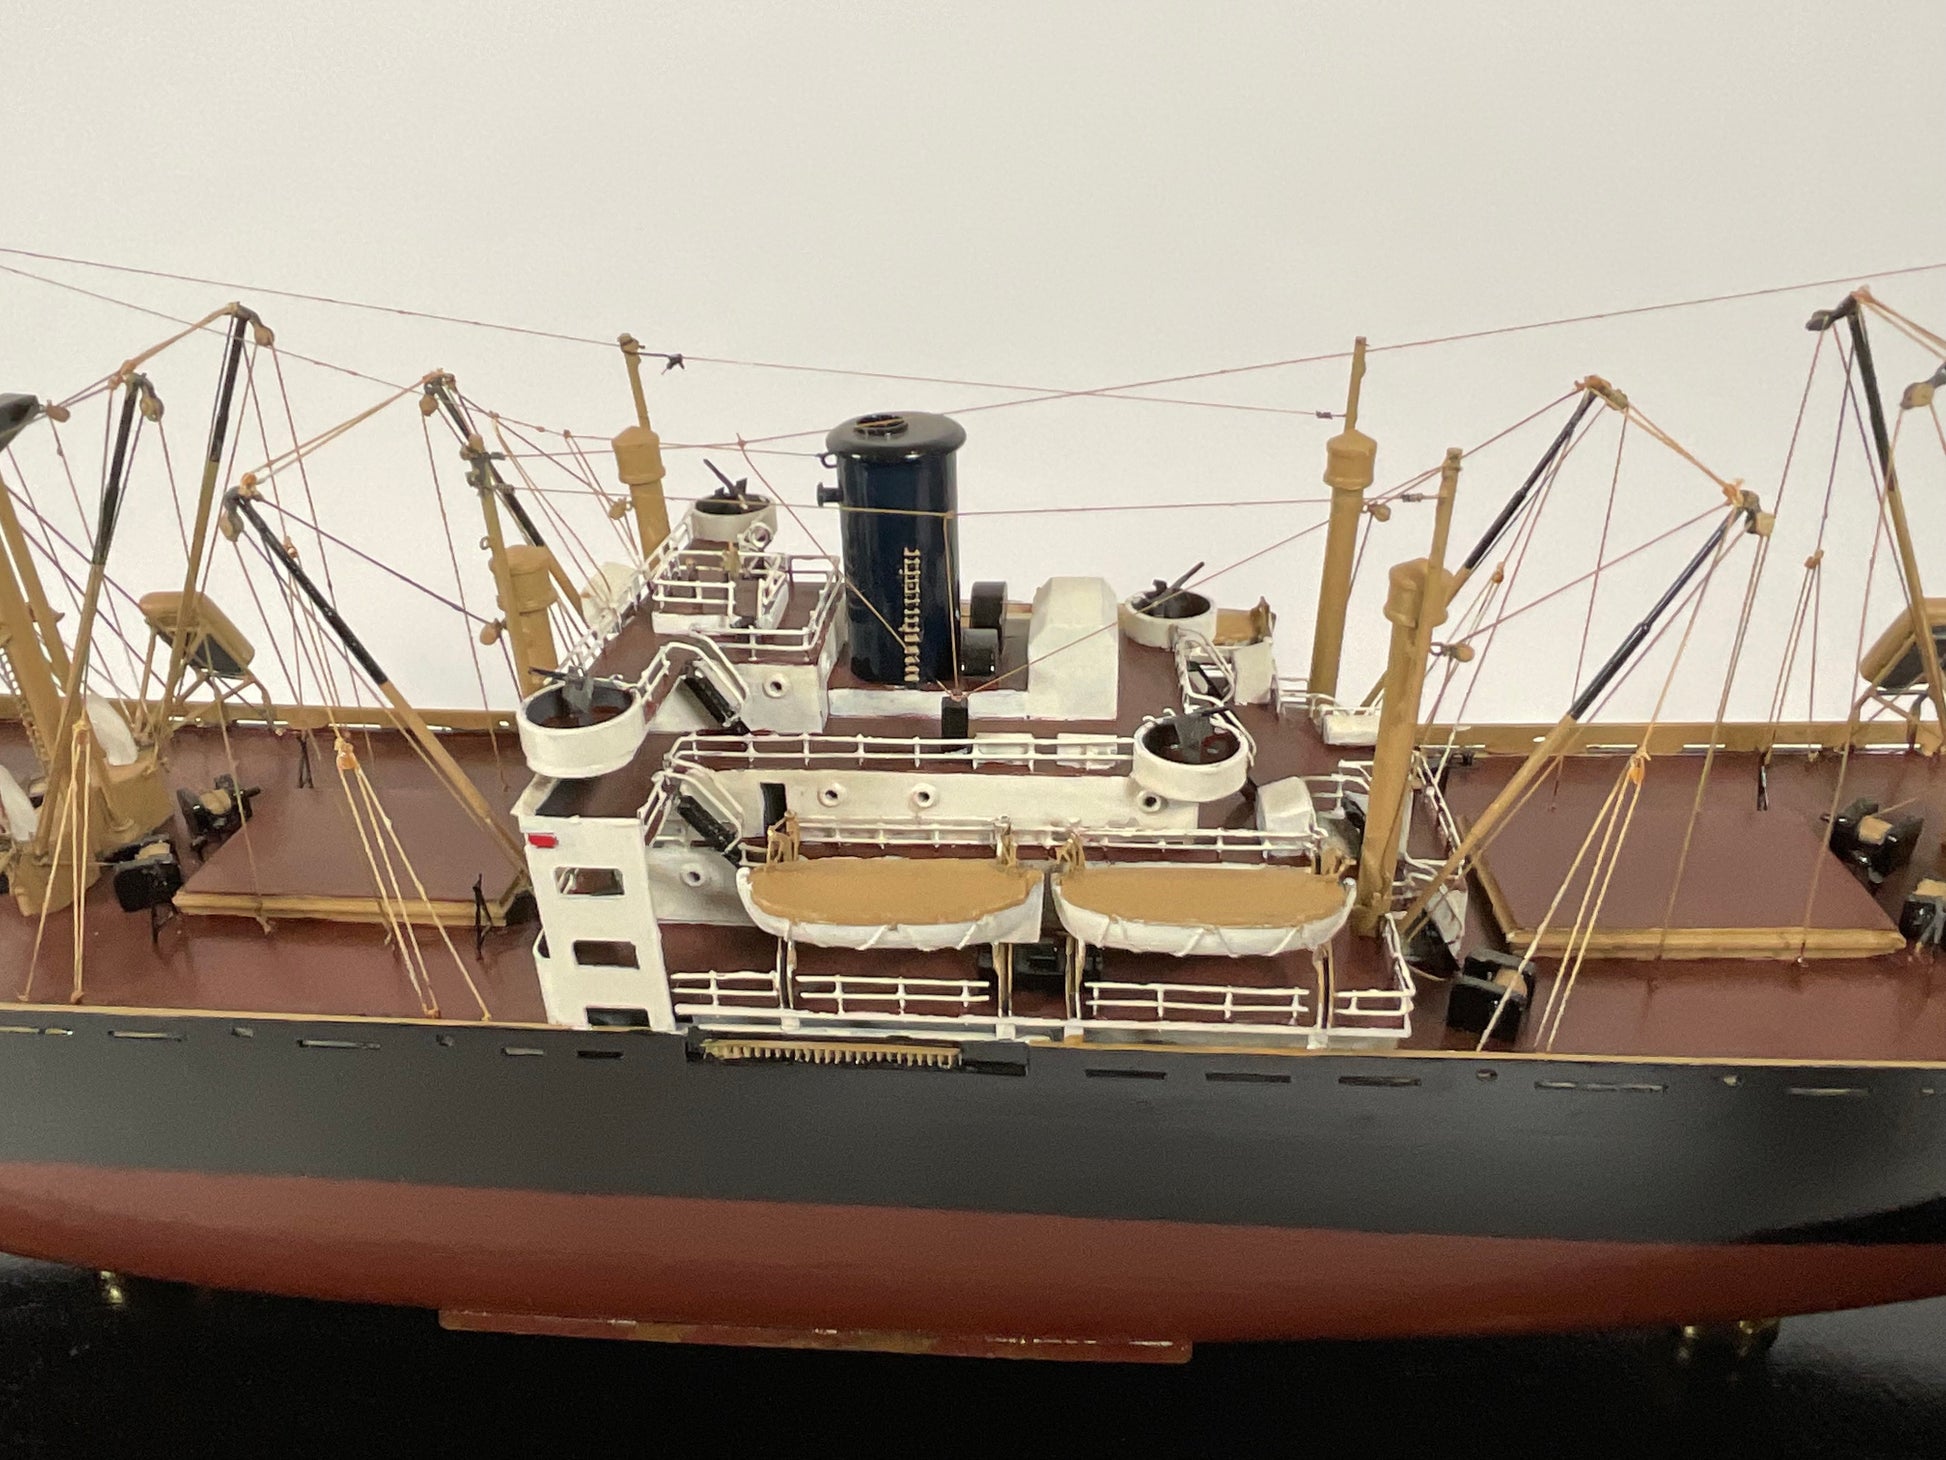 Model of the American Merchant Ship “United States Victory” - Lannan Gallery